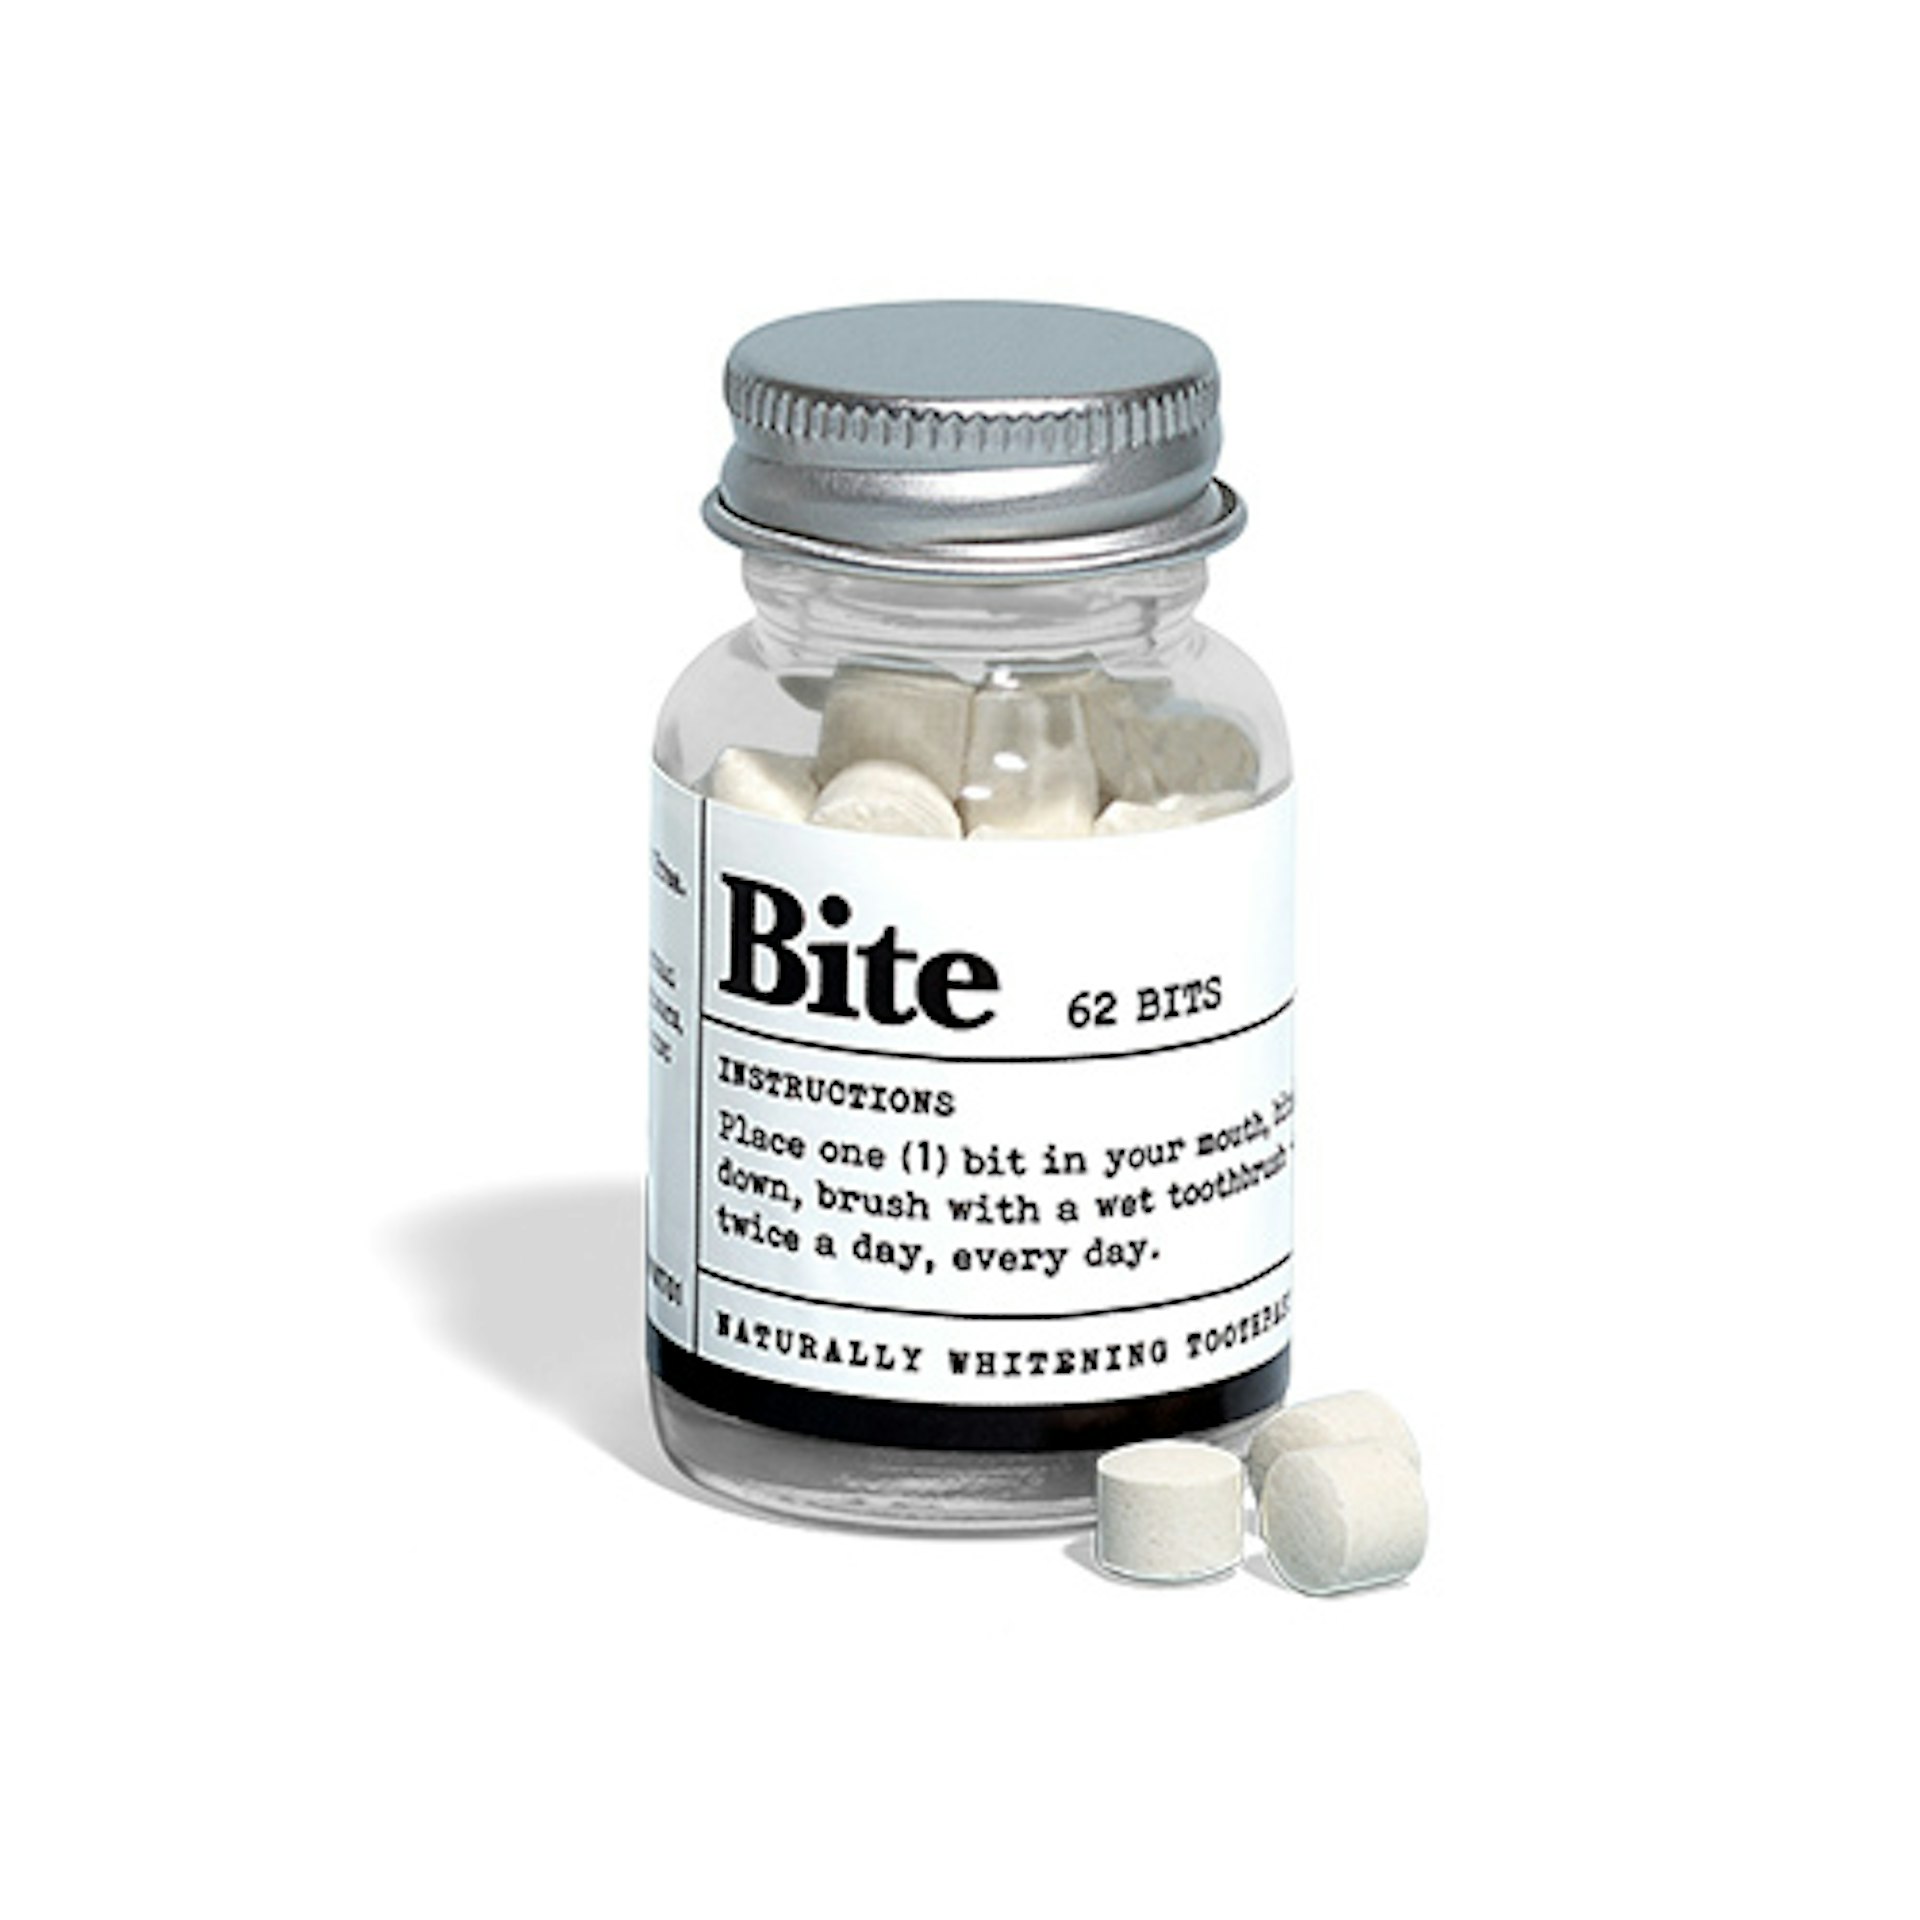 A bottle of Bite toothpaste tablets